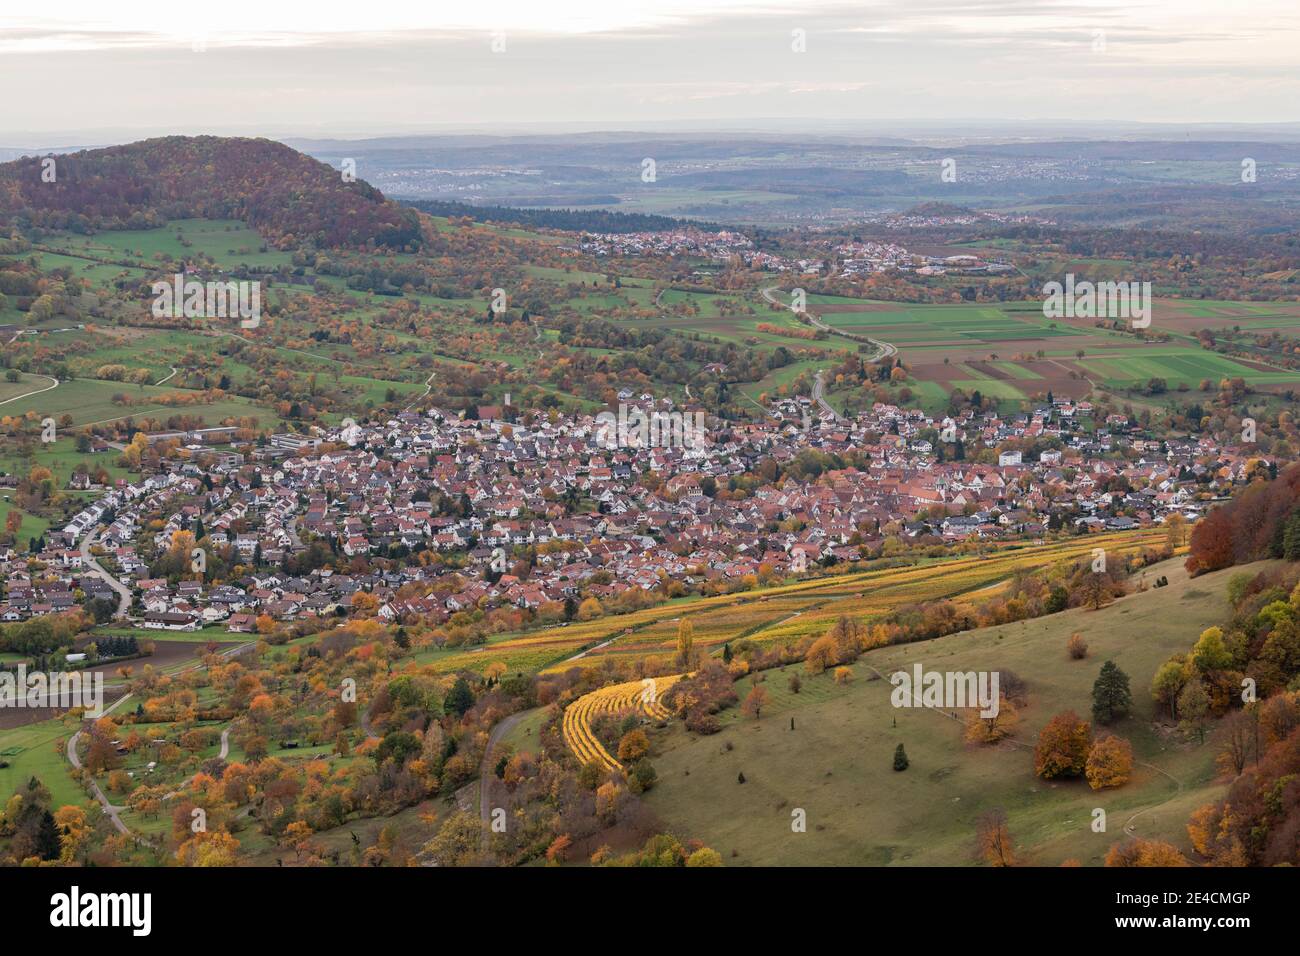 Europe, Germany, Baden-Wuerttemberg, Swabian Alb, Biosphere Area, Neuffen, view from above on place, forest, orchards and vineyards in autumn, Neuffener Heide Stock Photo